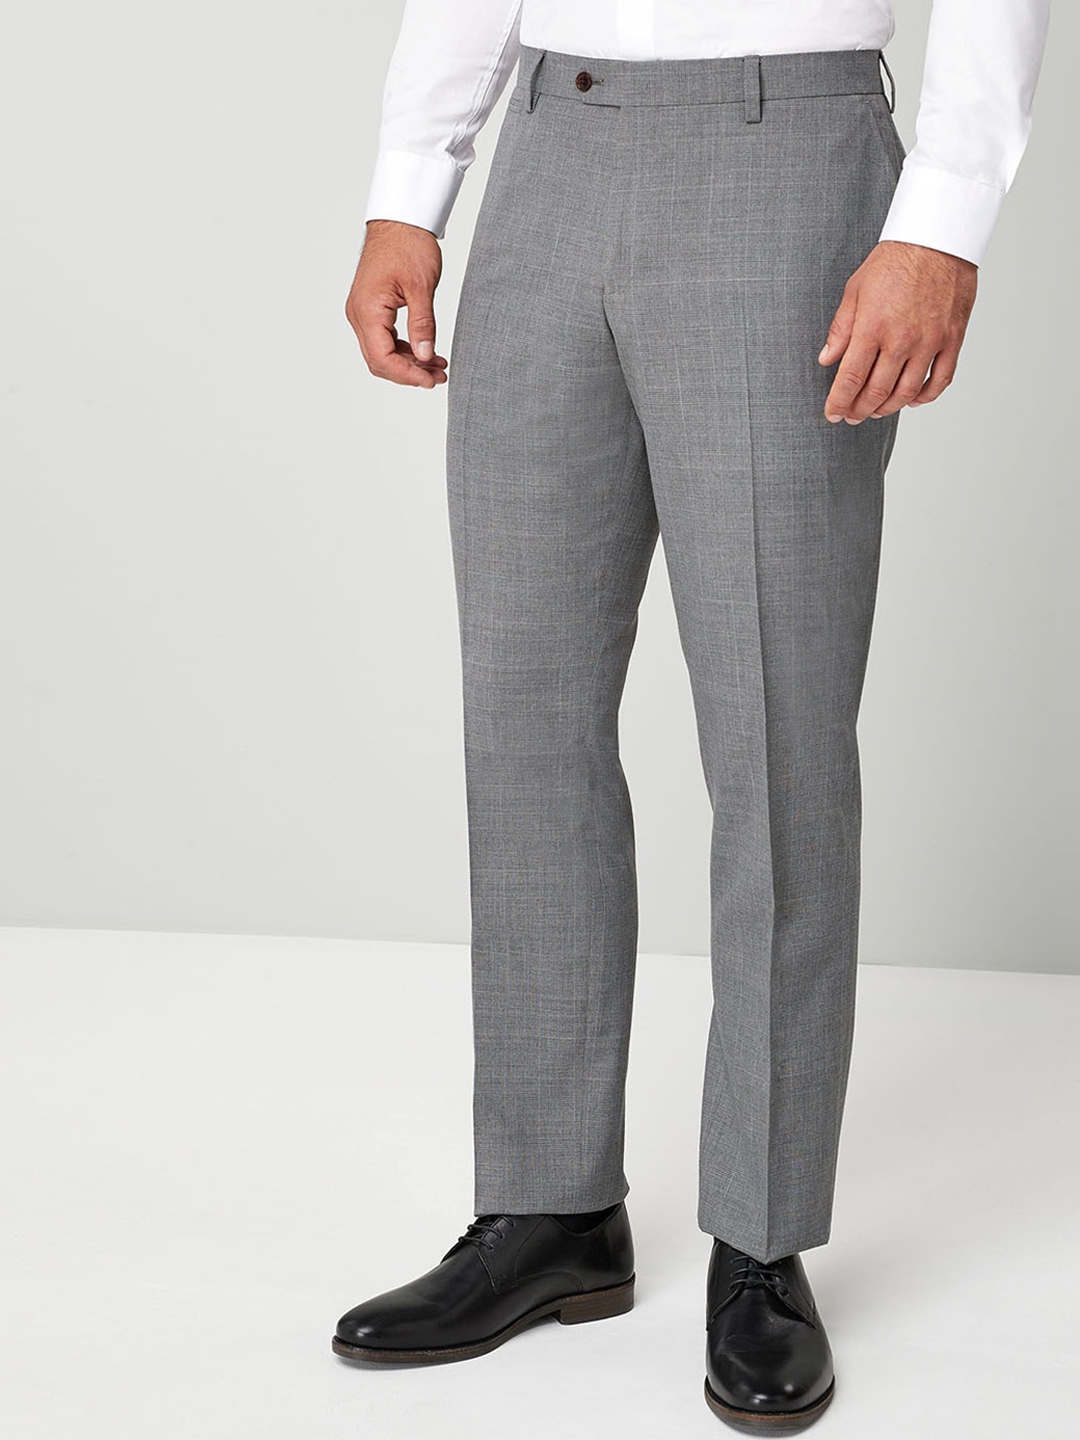 Buy Next Men Grey Slim Fit Checked Regular Trousers  Trousers for Men  5677692  Myntra